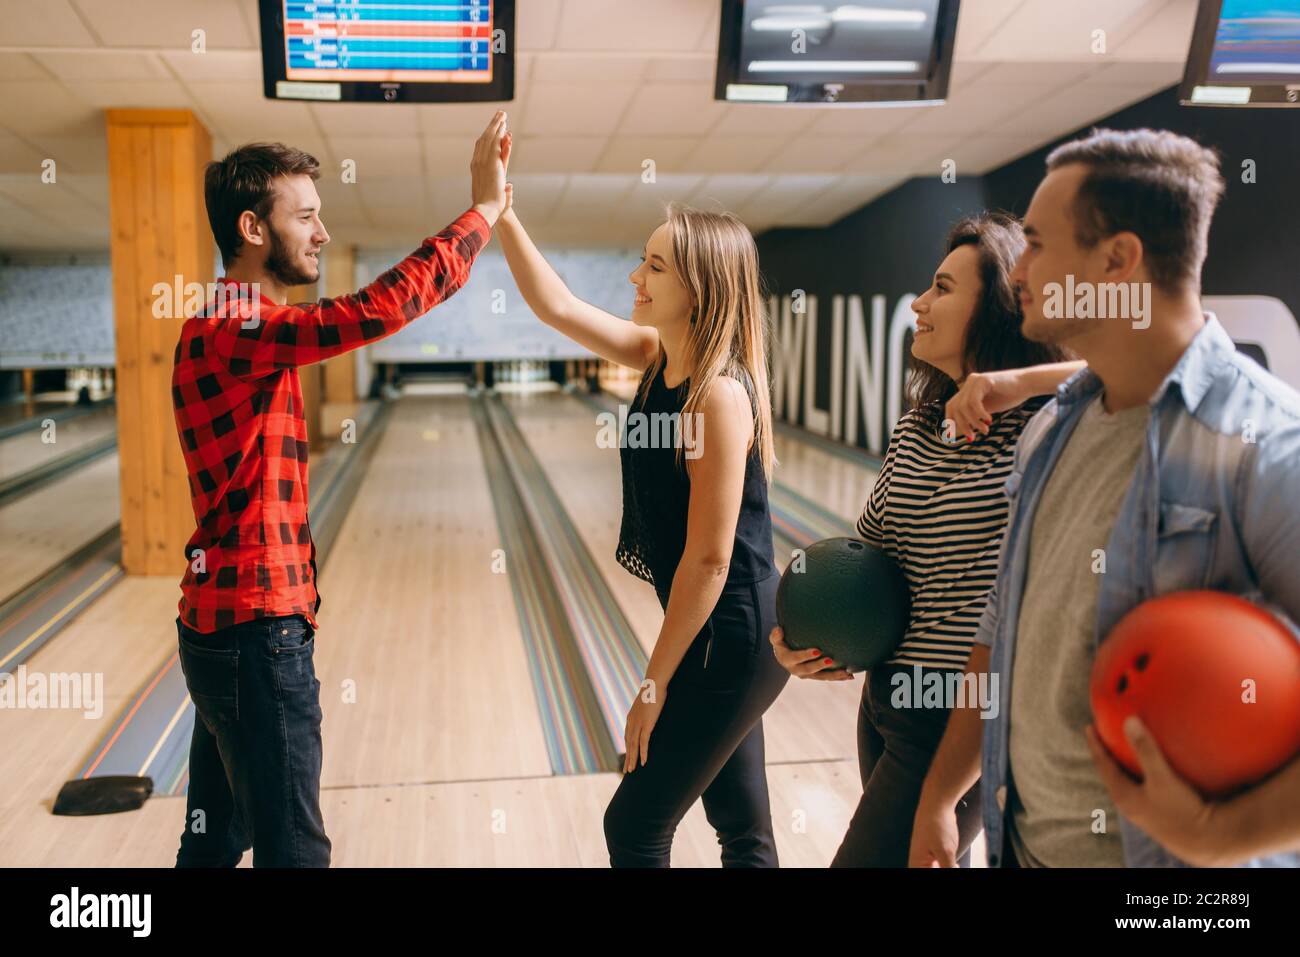 Bowler throws ball on lane and makes strike shot. Bowling alley team congratulates each other, successful throwing. Men and women playing the game in Stock Photo